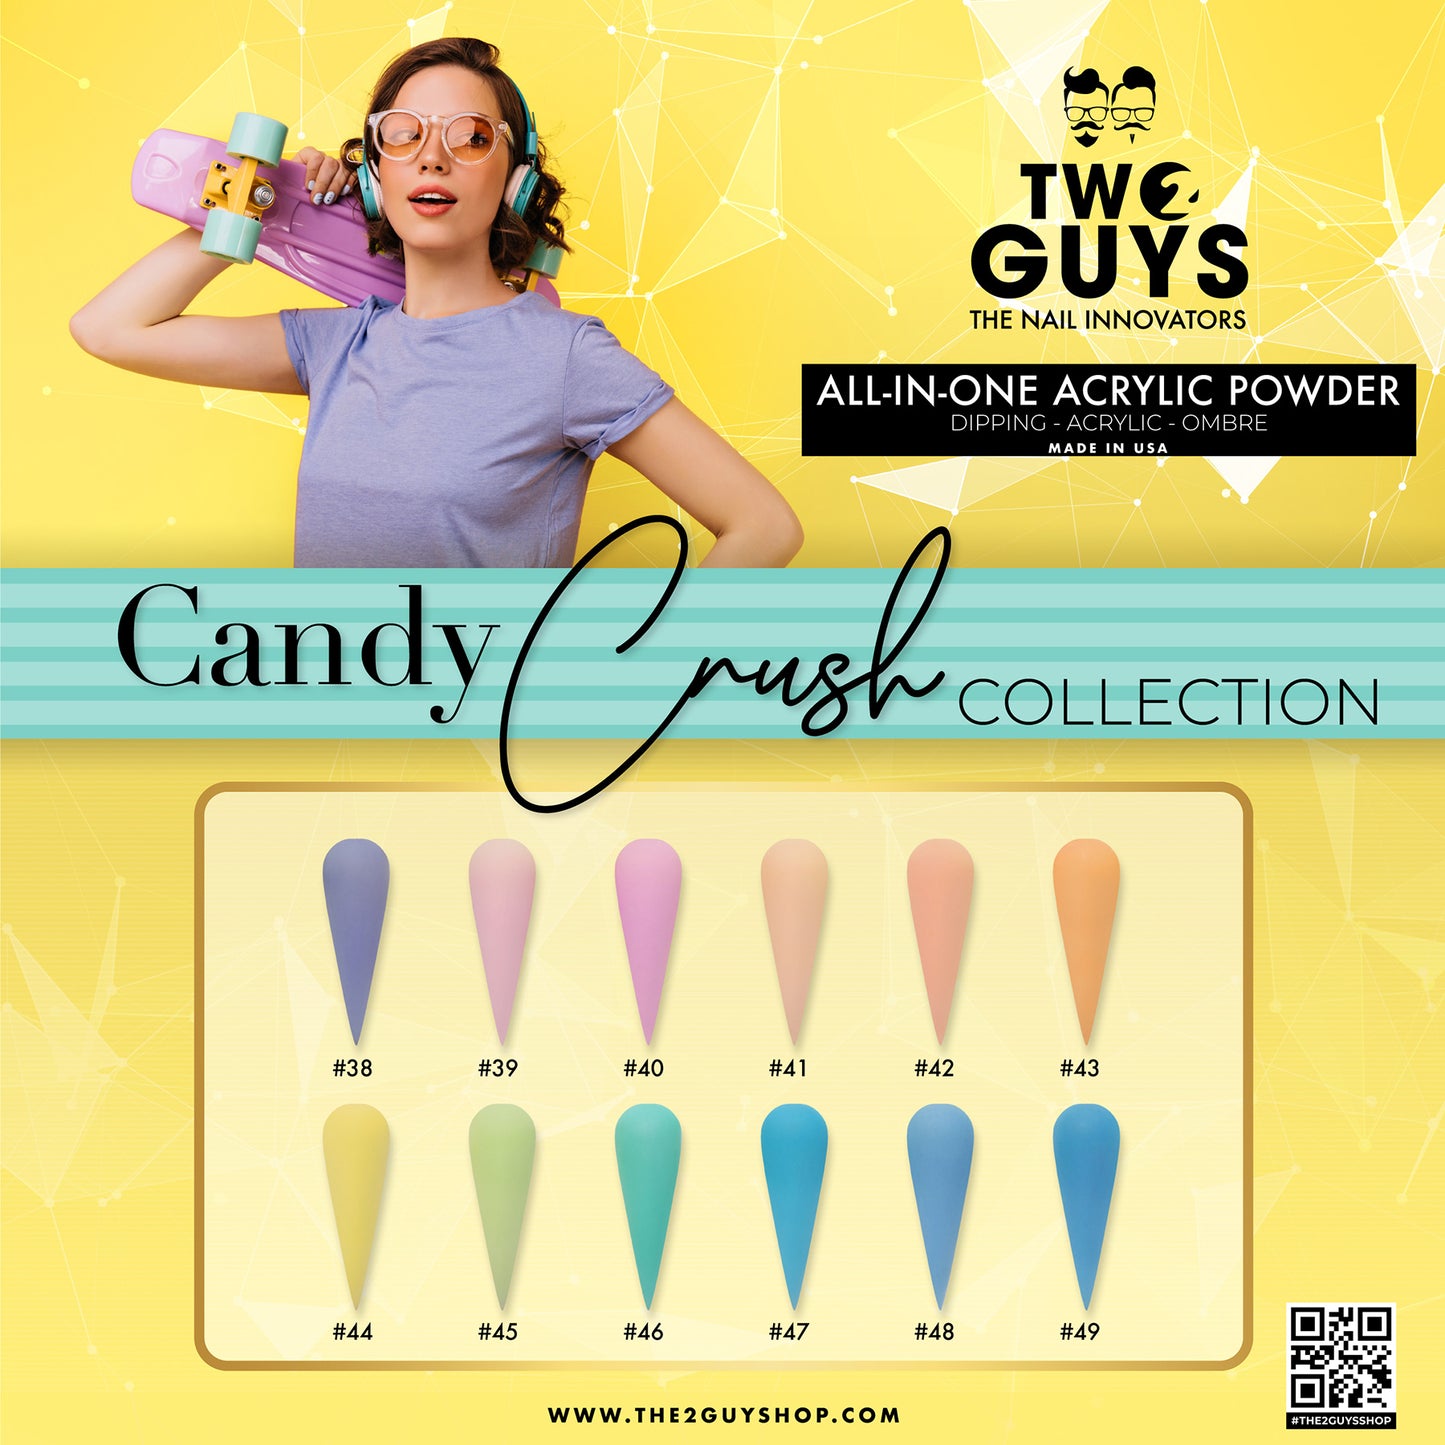 Candy Crush Collection 12 Pastel Colors #38-#49 - 2Guys Acrylic Powder